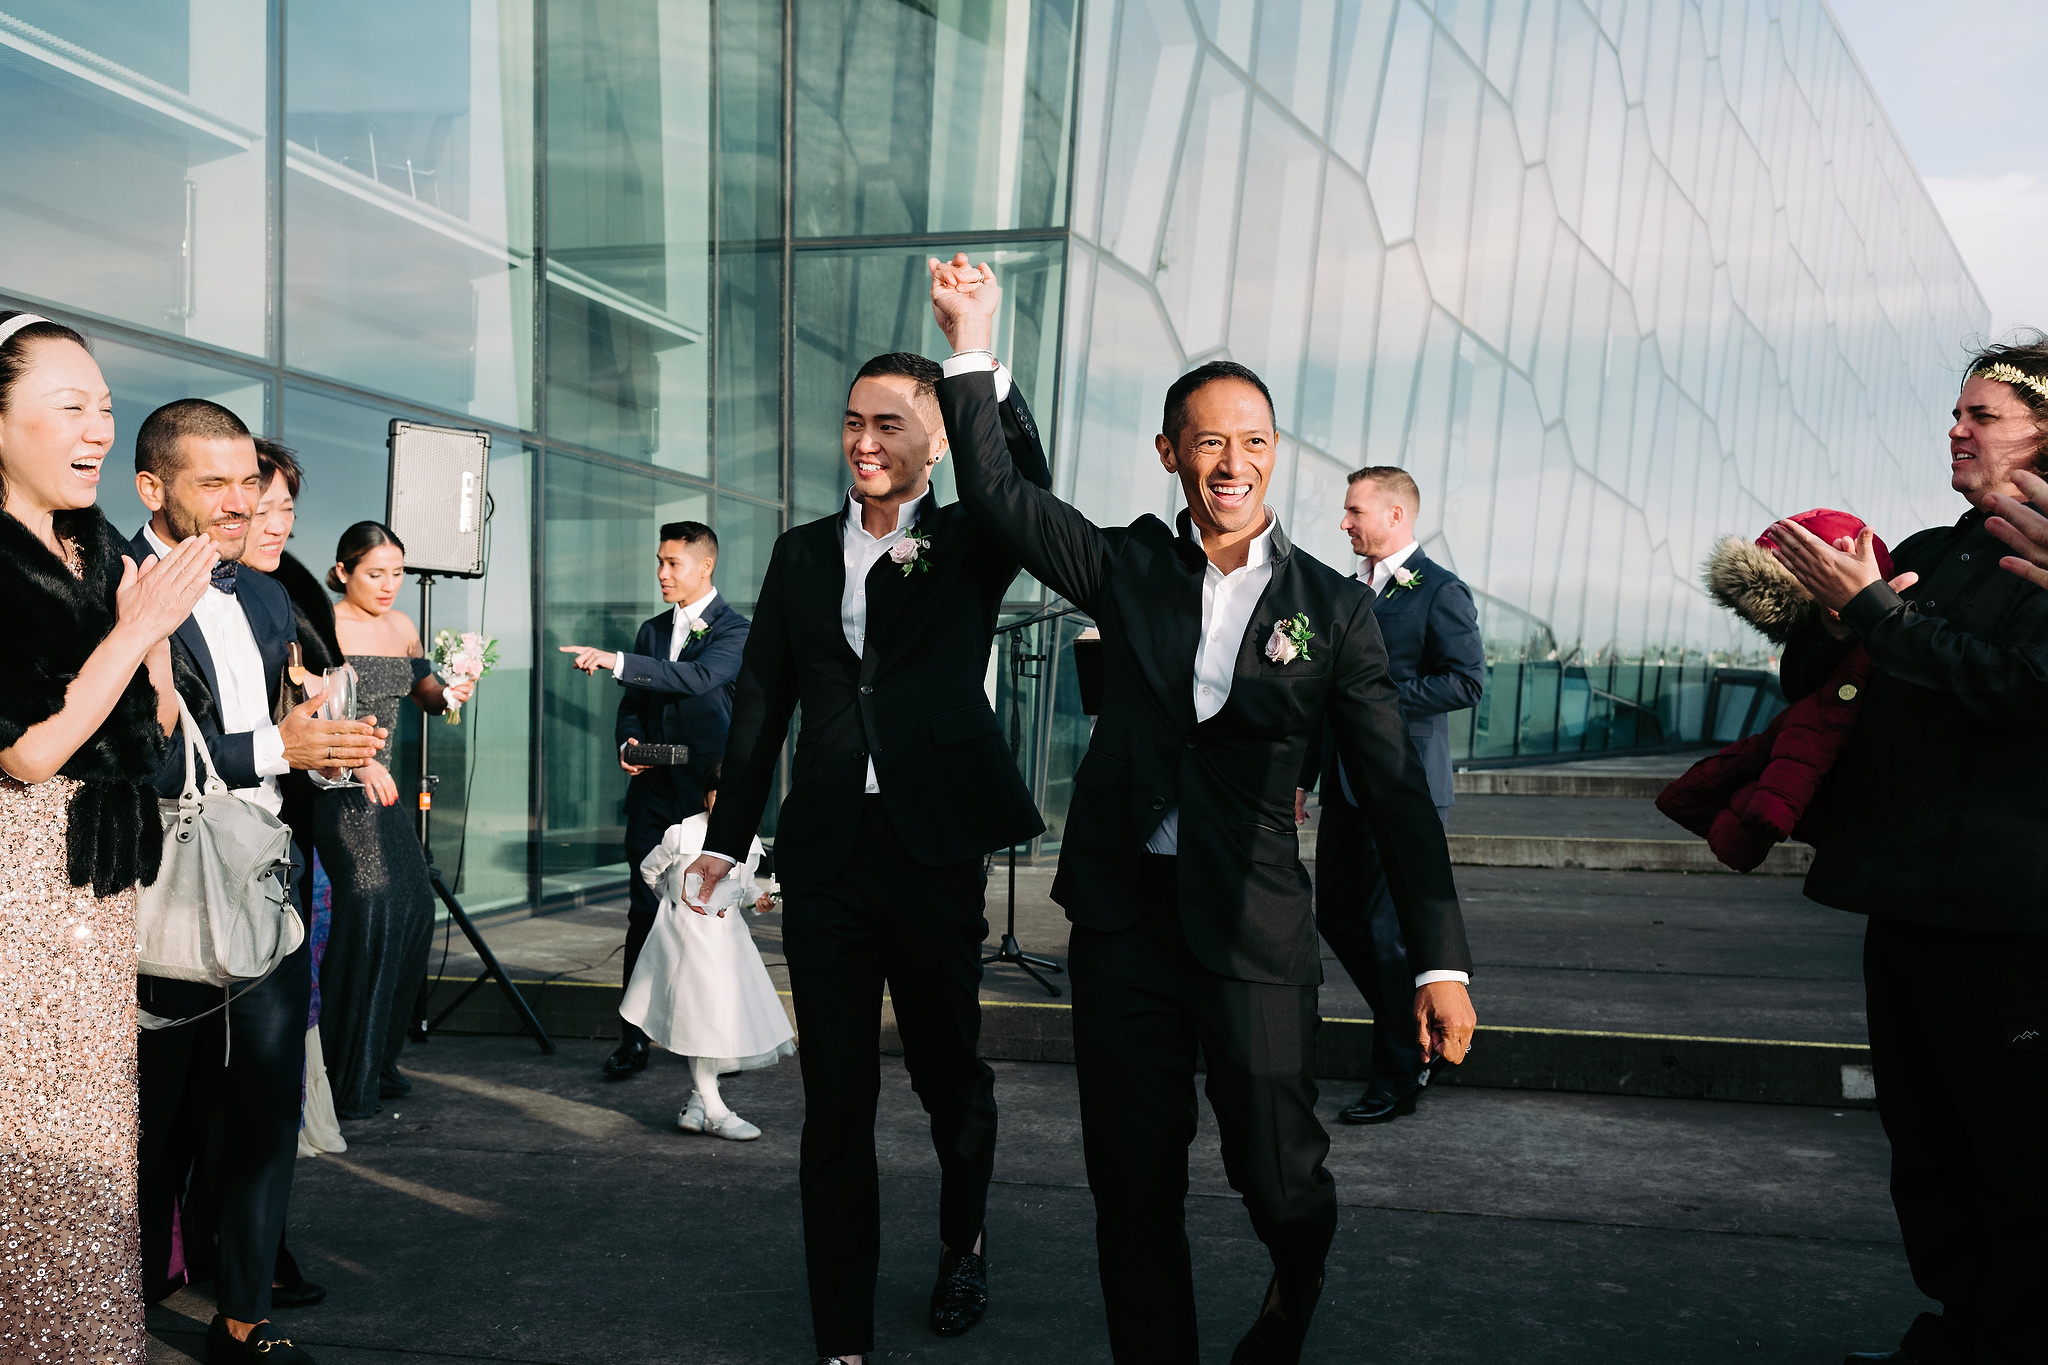 Gay pride in Iceland, husband and husband, just married